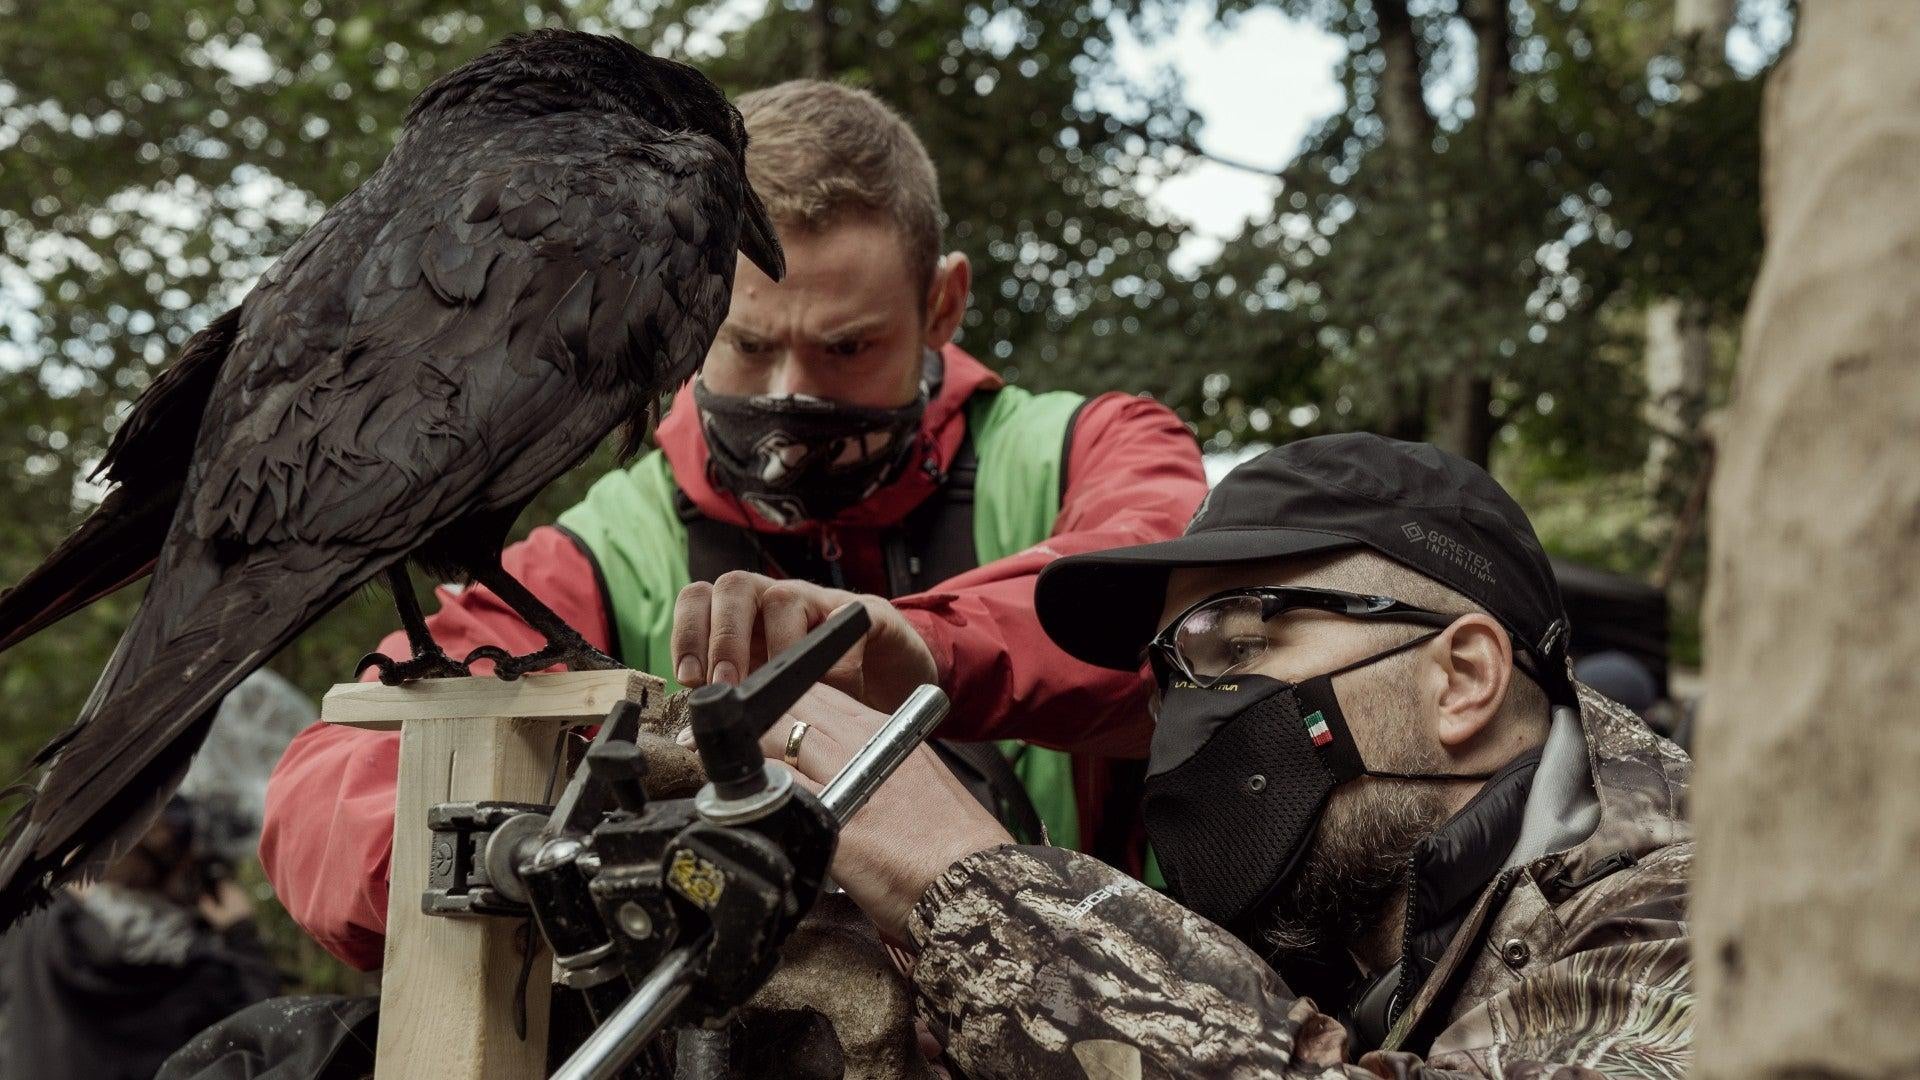 A masked Eggers working with a real bird. (Image: Focus Features)